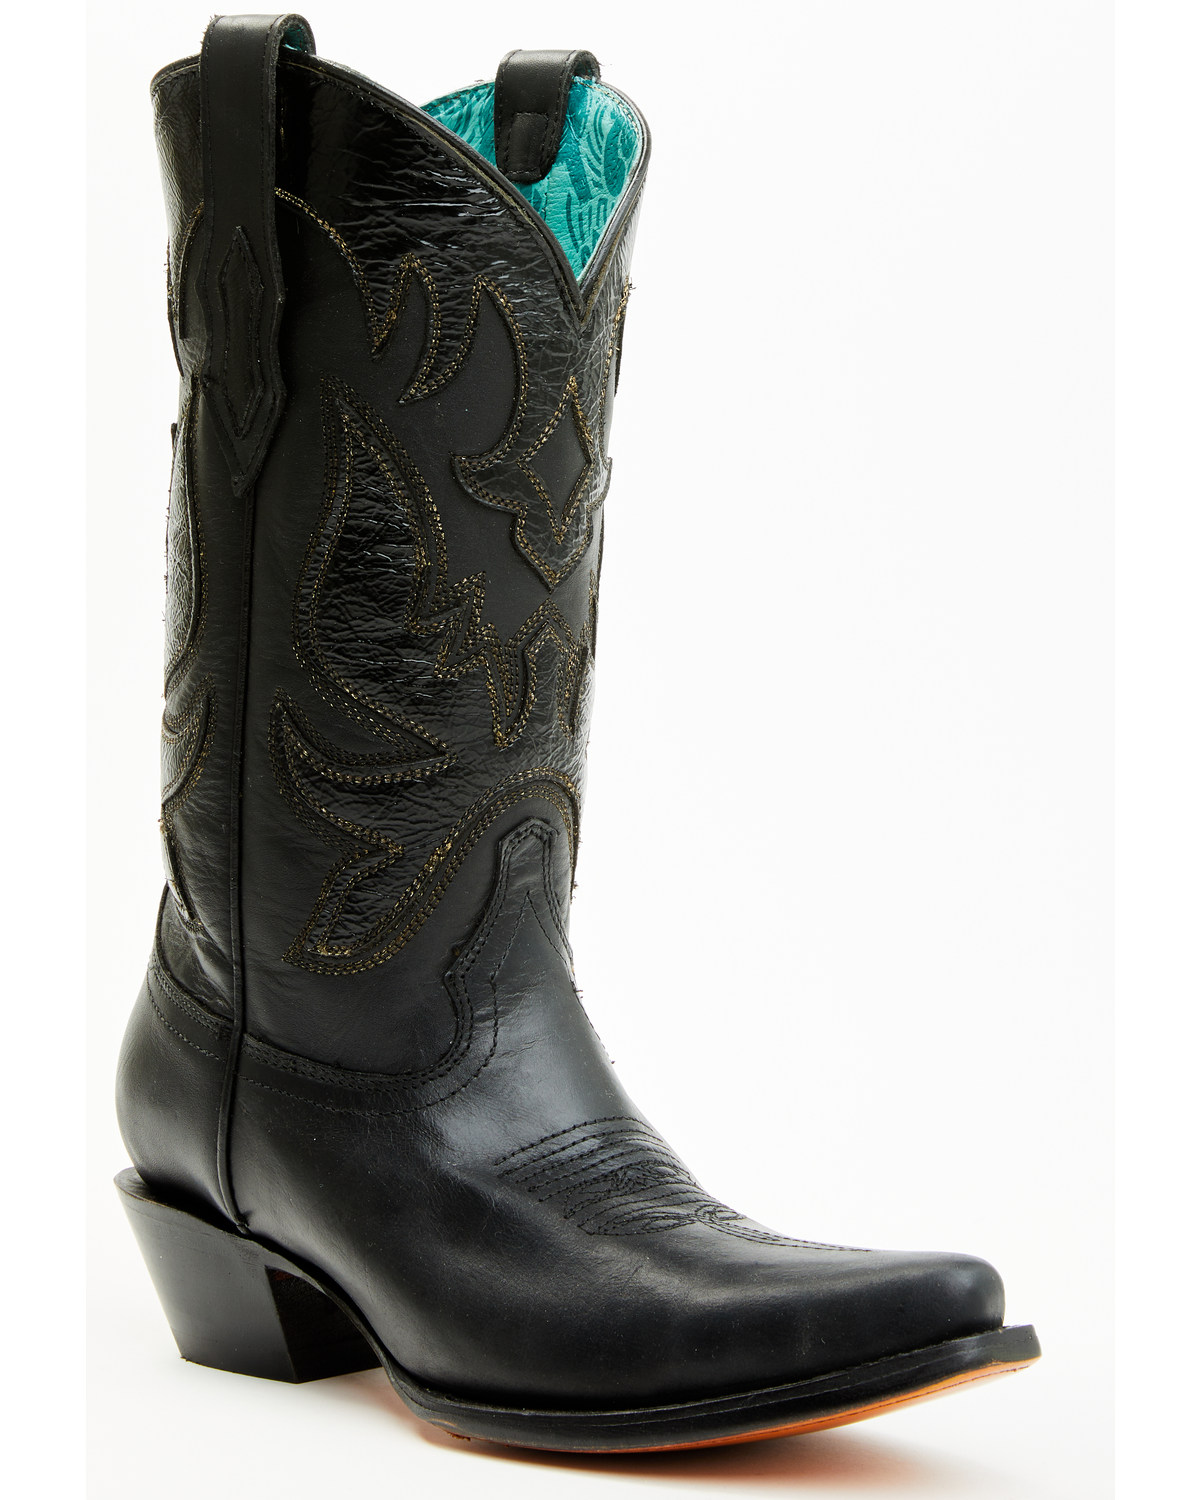 Corral Women's Overlay Western Boots - Snip Toe